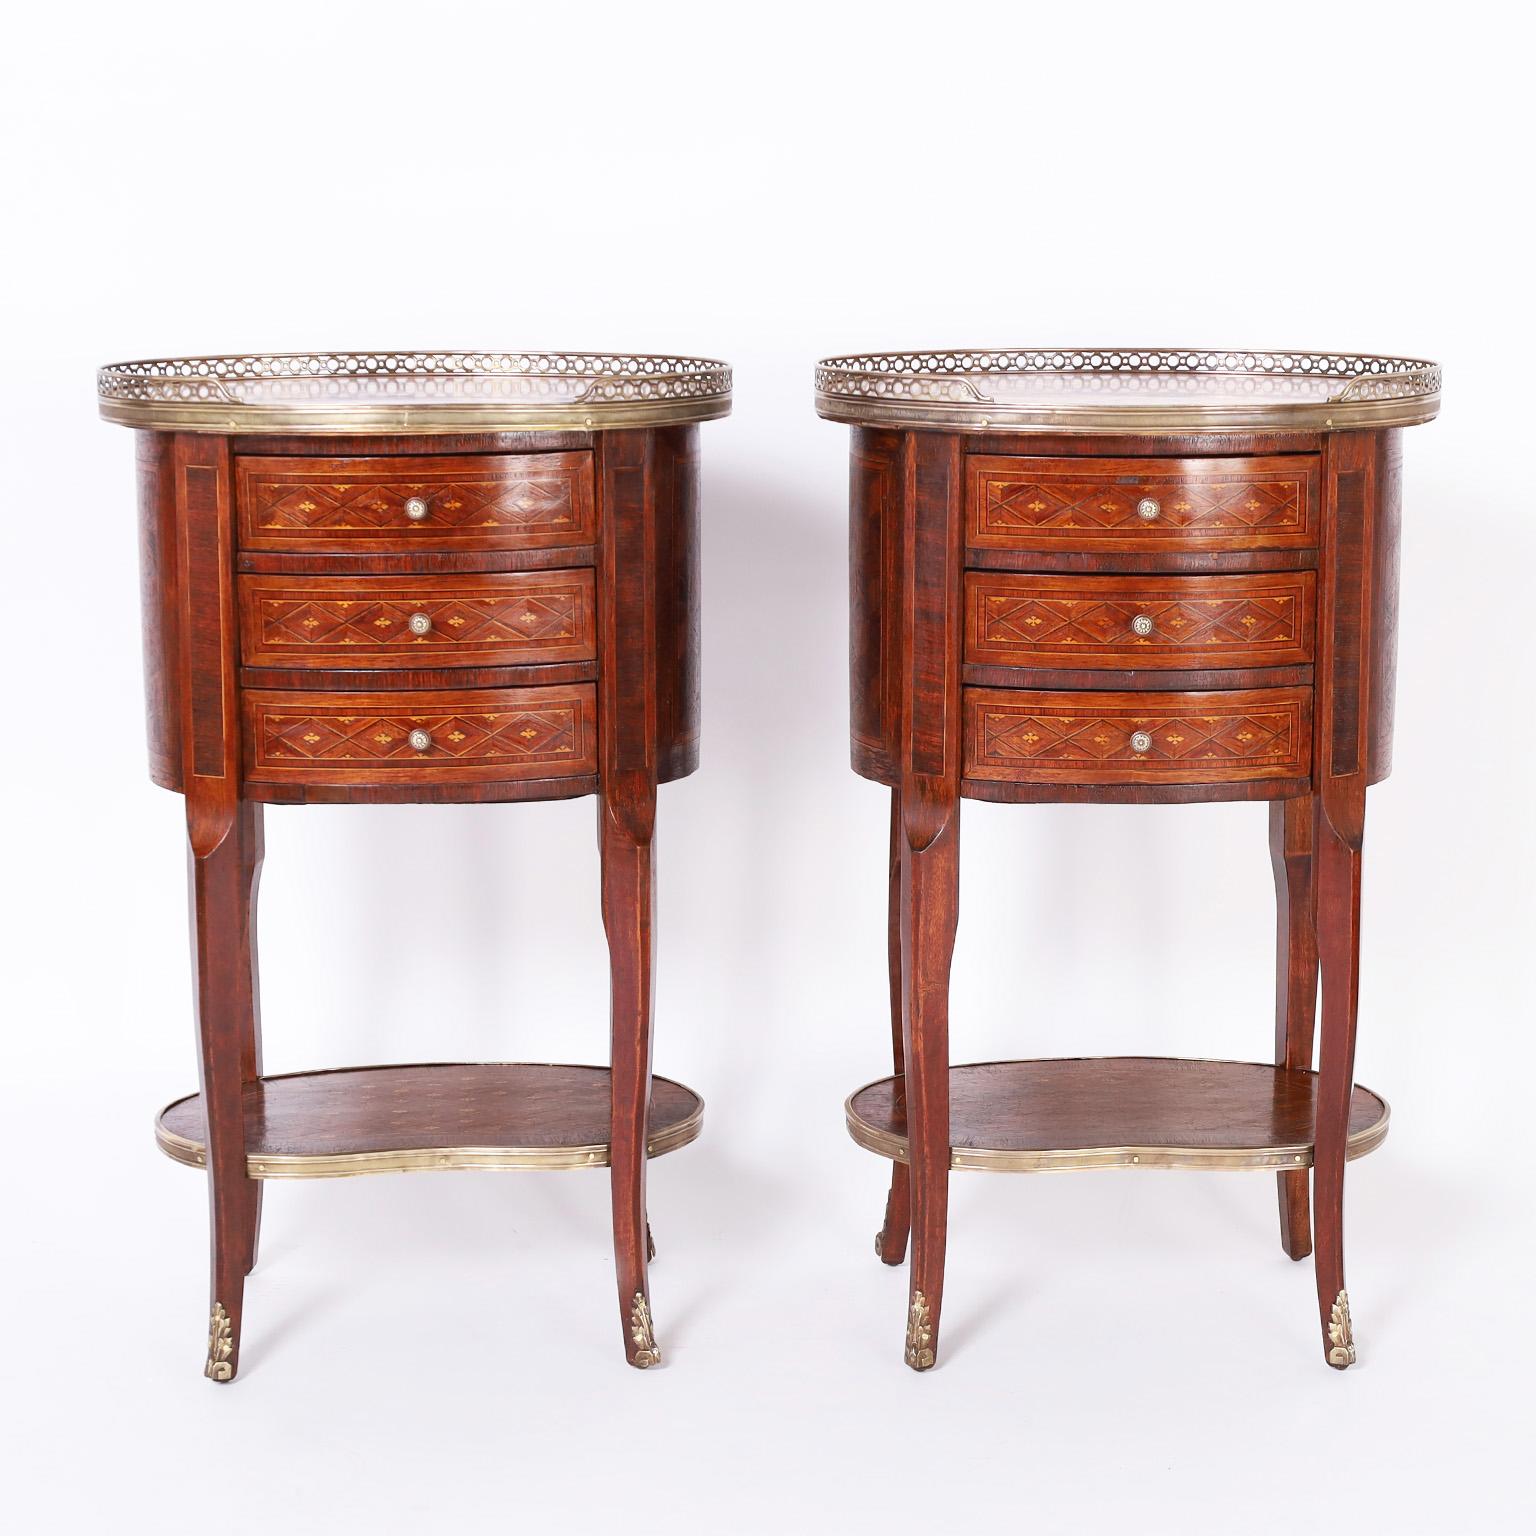 Refined pair of antique French Louis XV style stands with rouge marble tops having a brass gallery over a three drawer case with brass hardware, cross banding and ebony and kingwood classic inlays. The four elegant legs are connected by a kidney